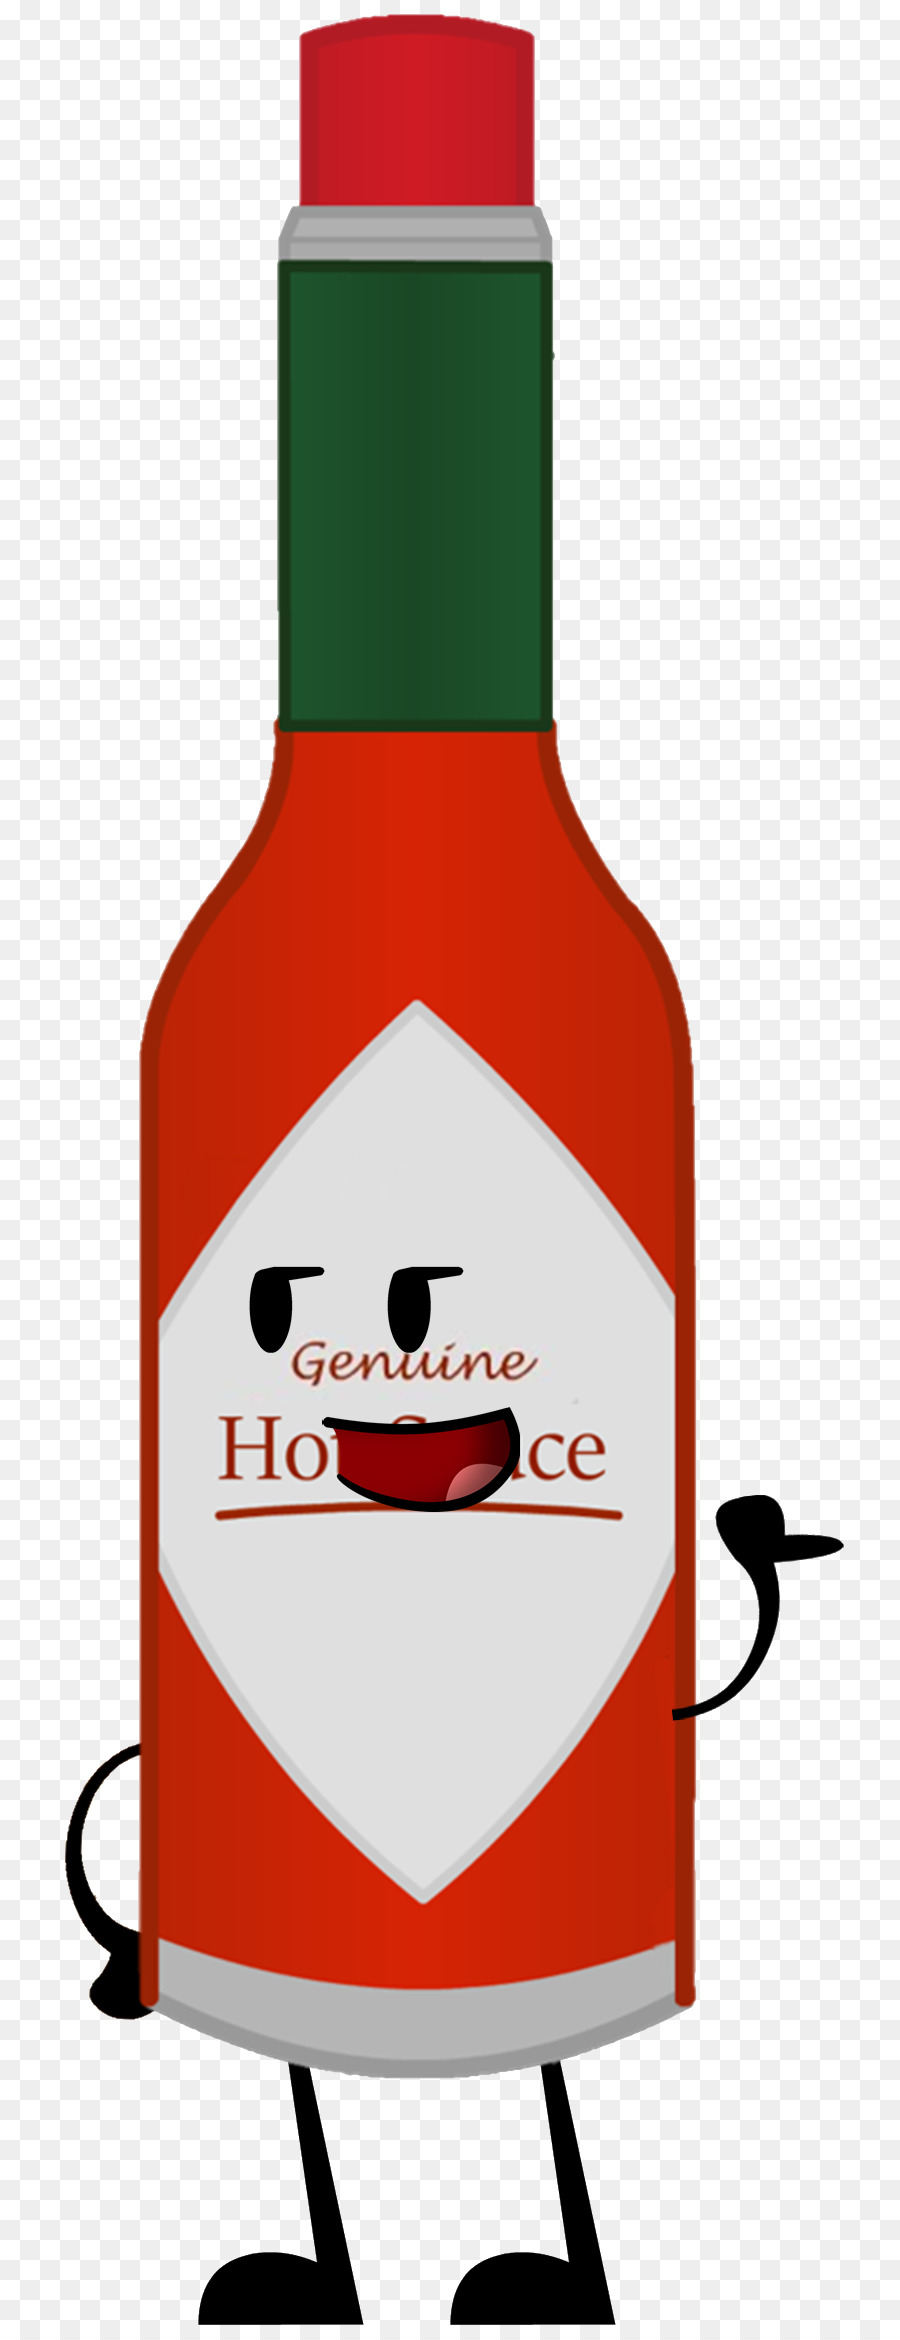 Cachorro Quente，Molho Barbecue PNG